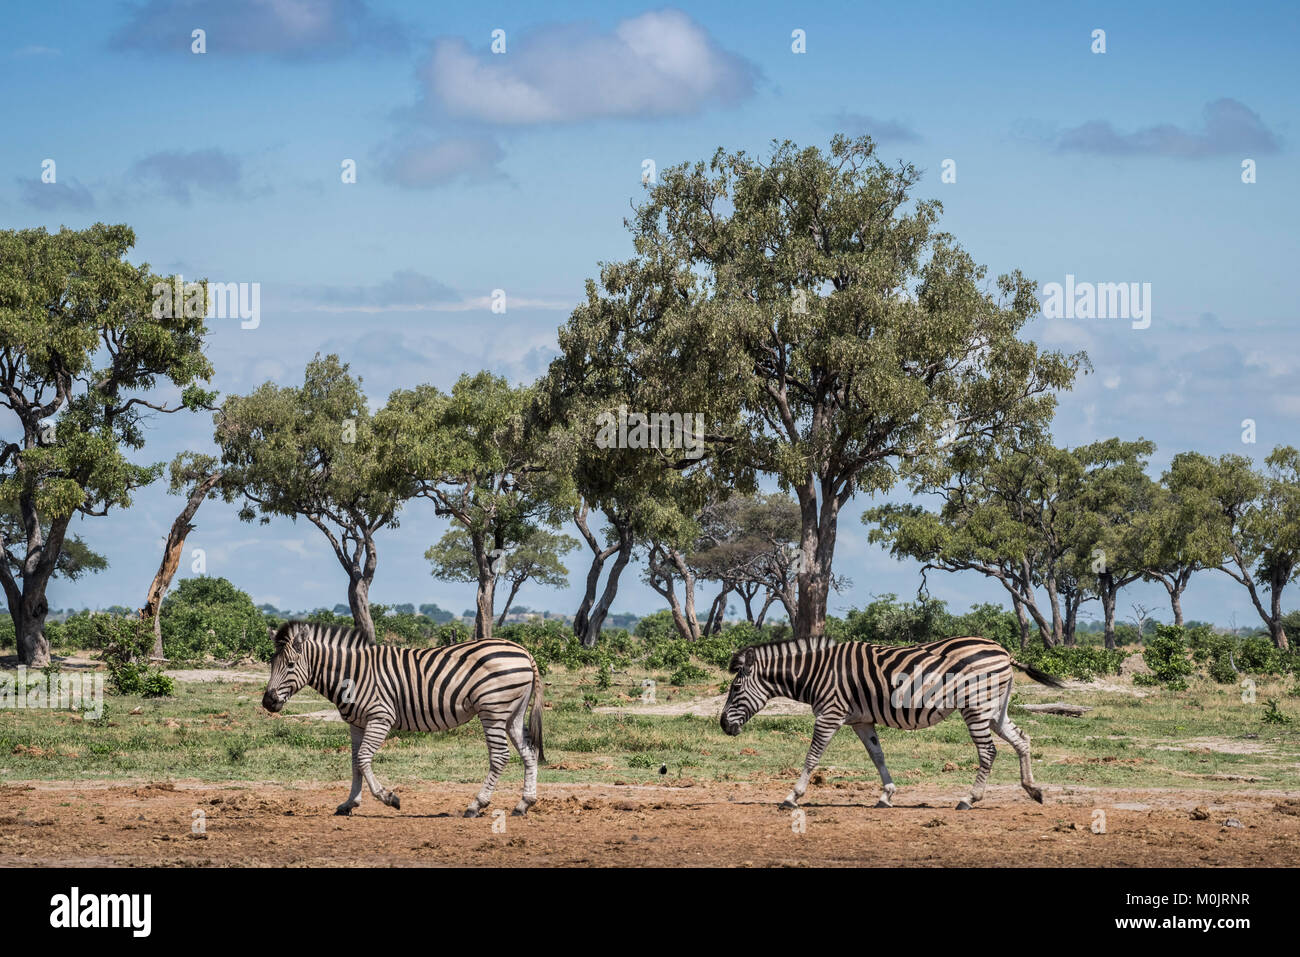 Burchell's Zebras (Equus burchelli) run one after the other, landscape with trees, Savuti, Chobe National Park, Chobe District Stock Photo